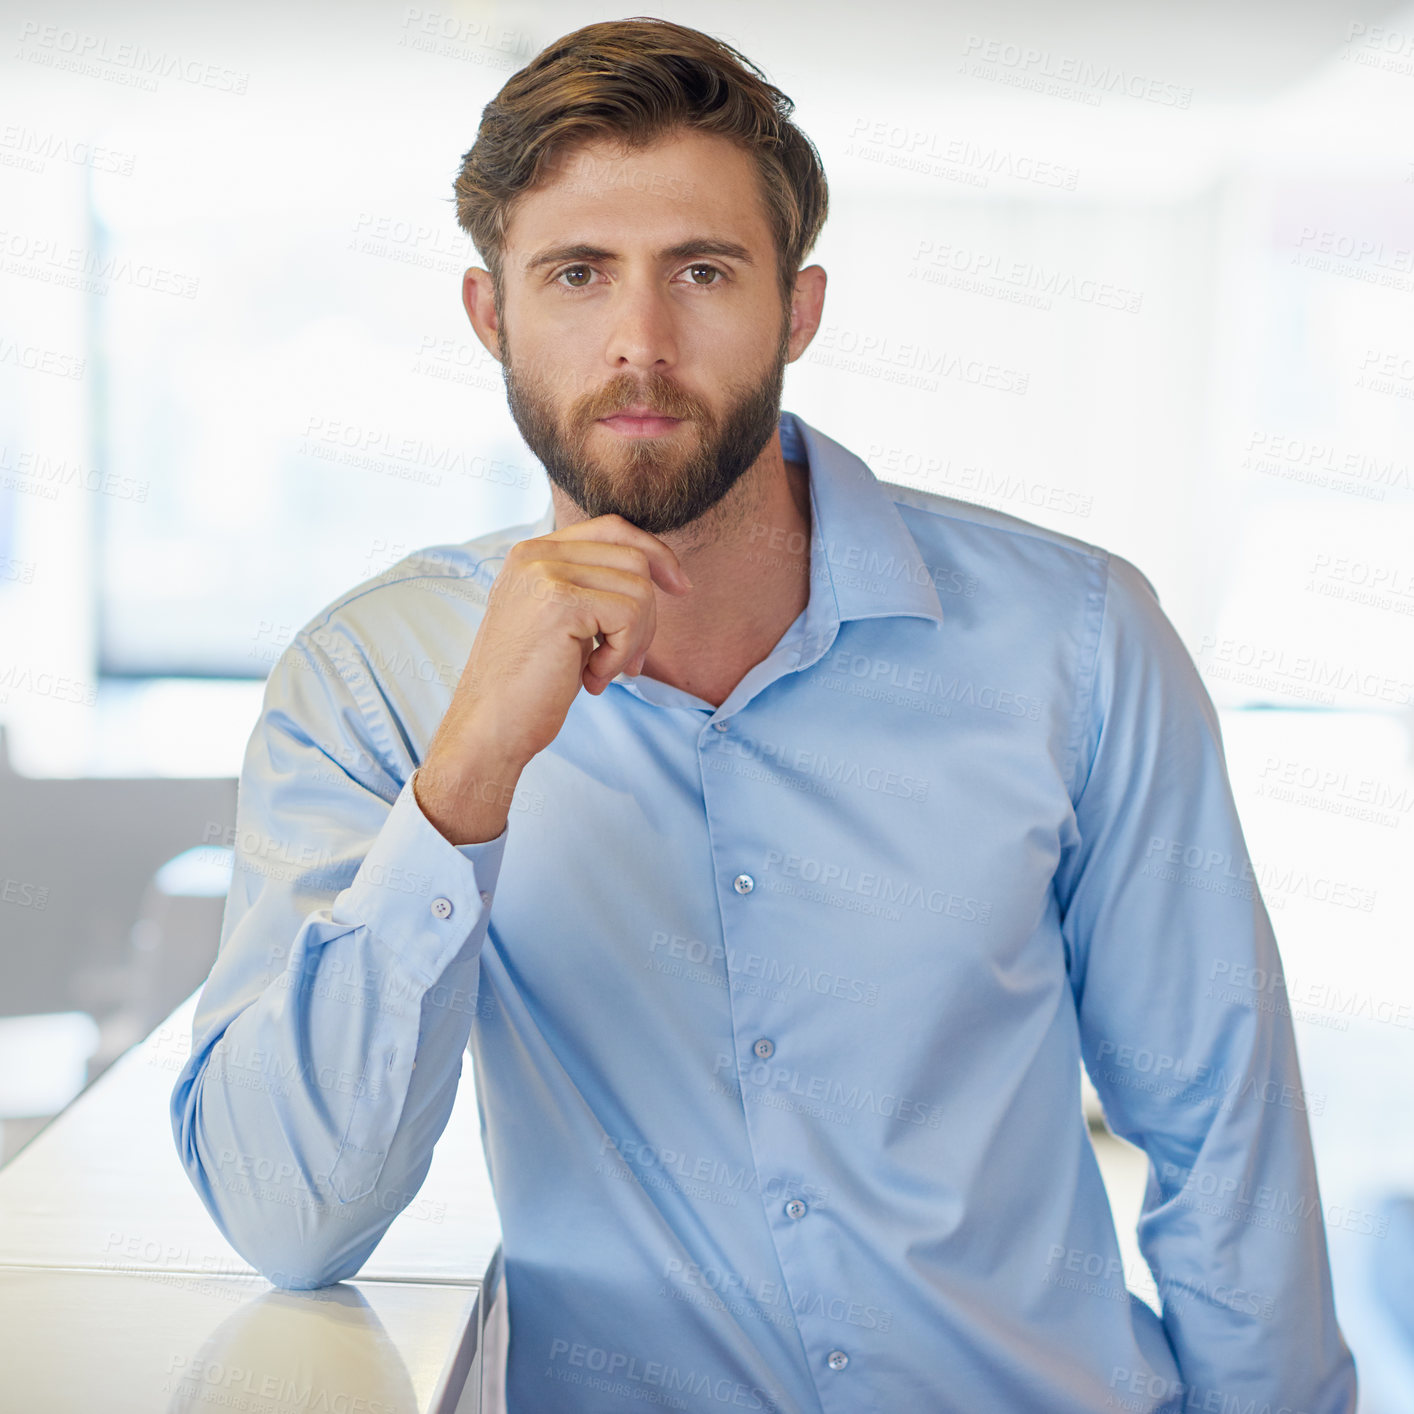 Buy stock photo Cropped portrait of a handsome young businessman in the office